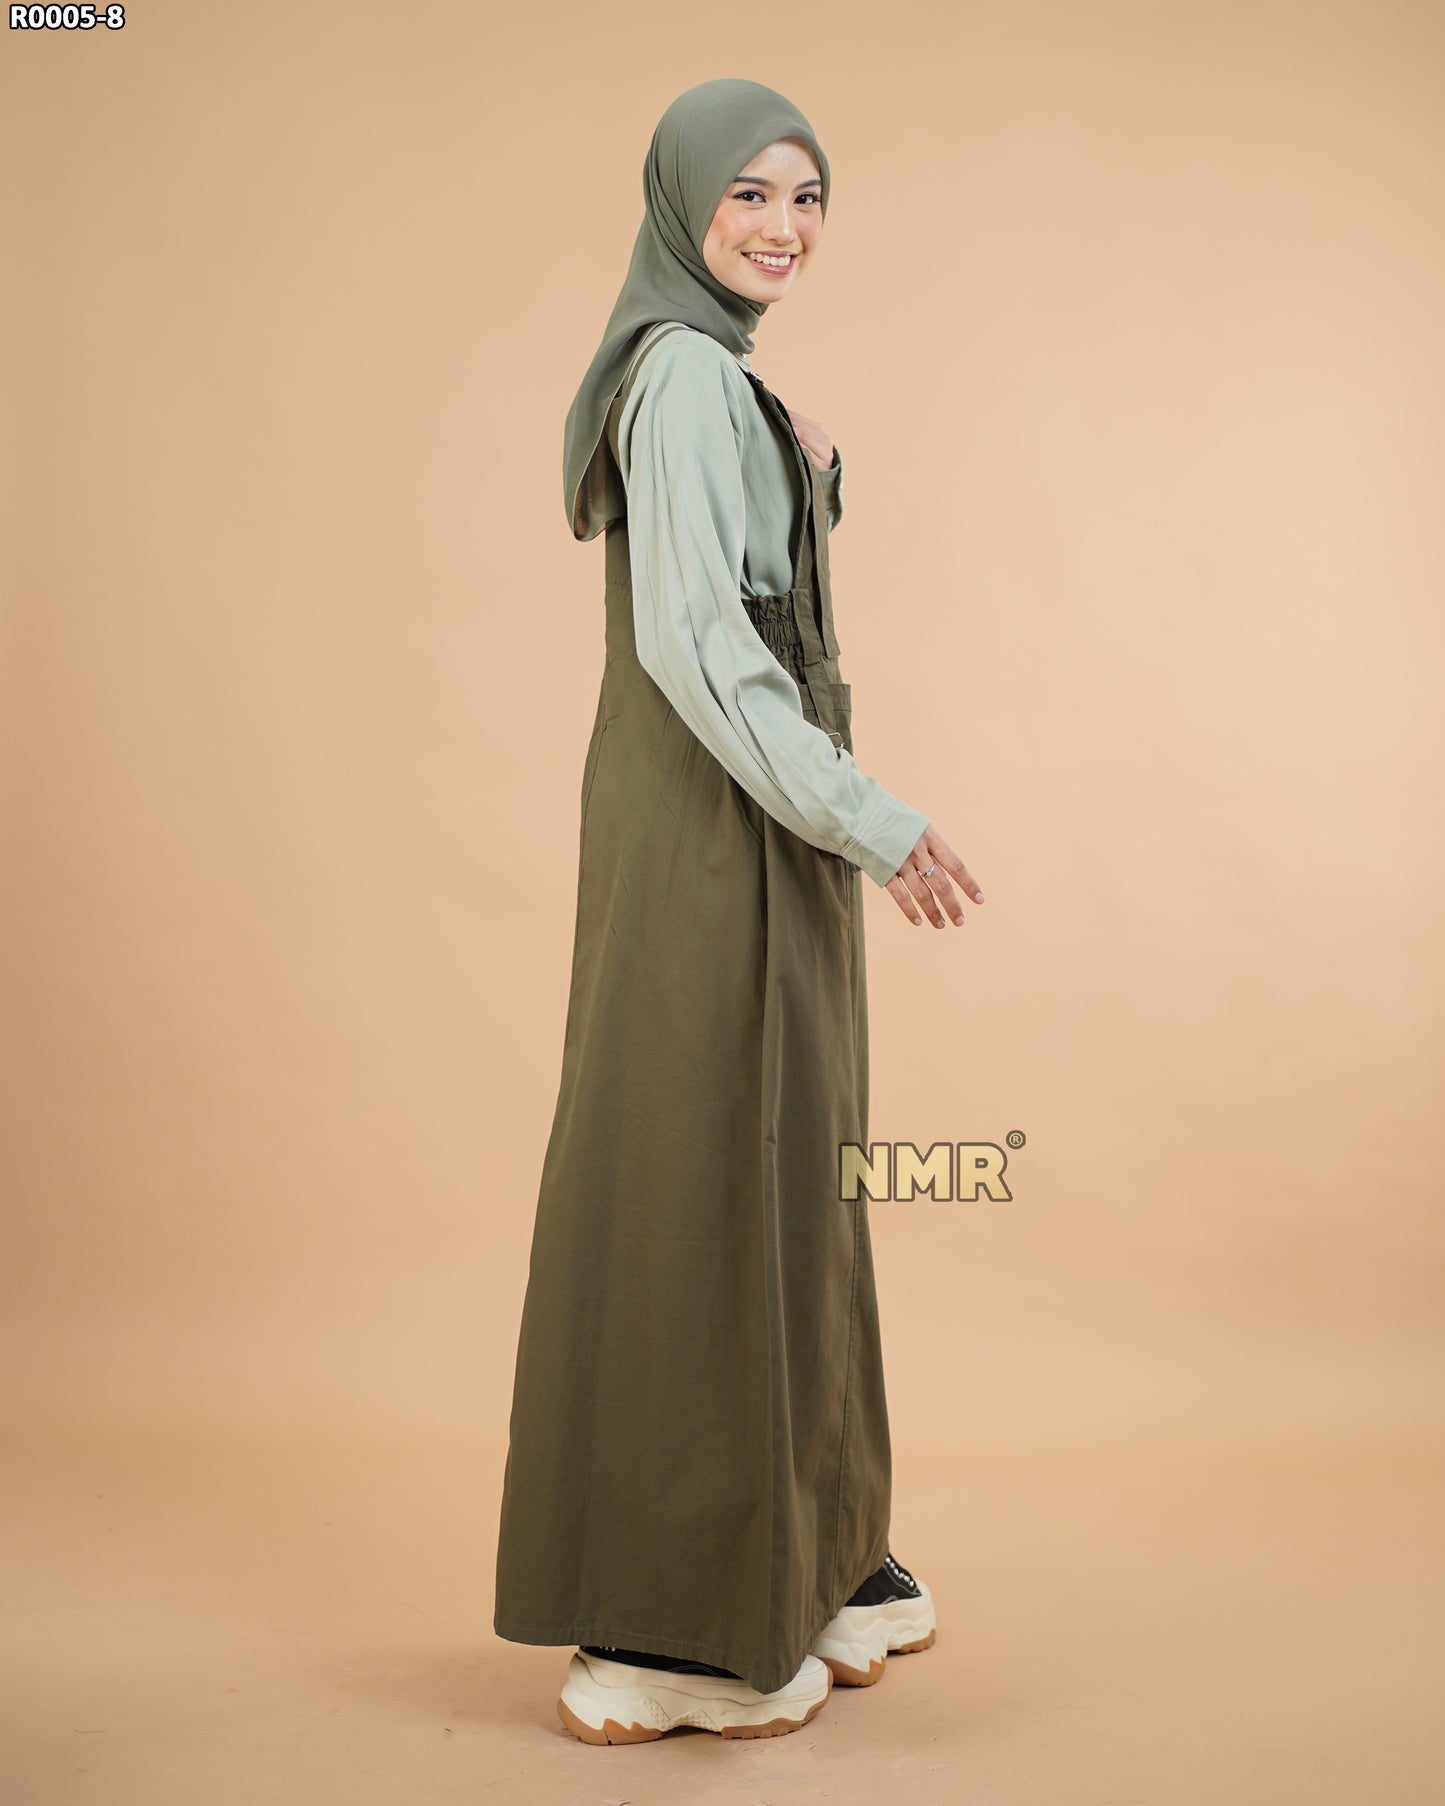 NMR Gamis Jumpsuit Overall Baby Canvas Vol R0005-8